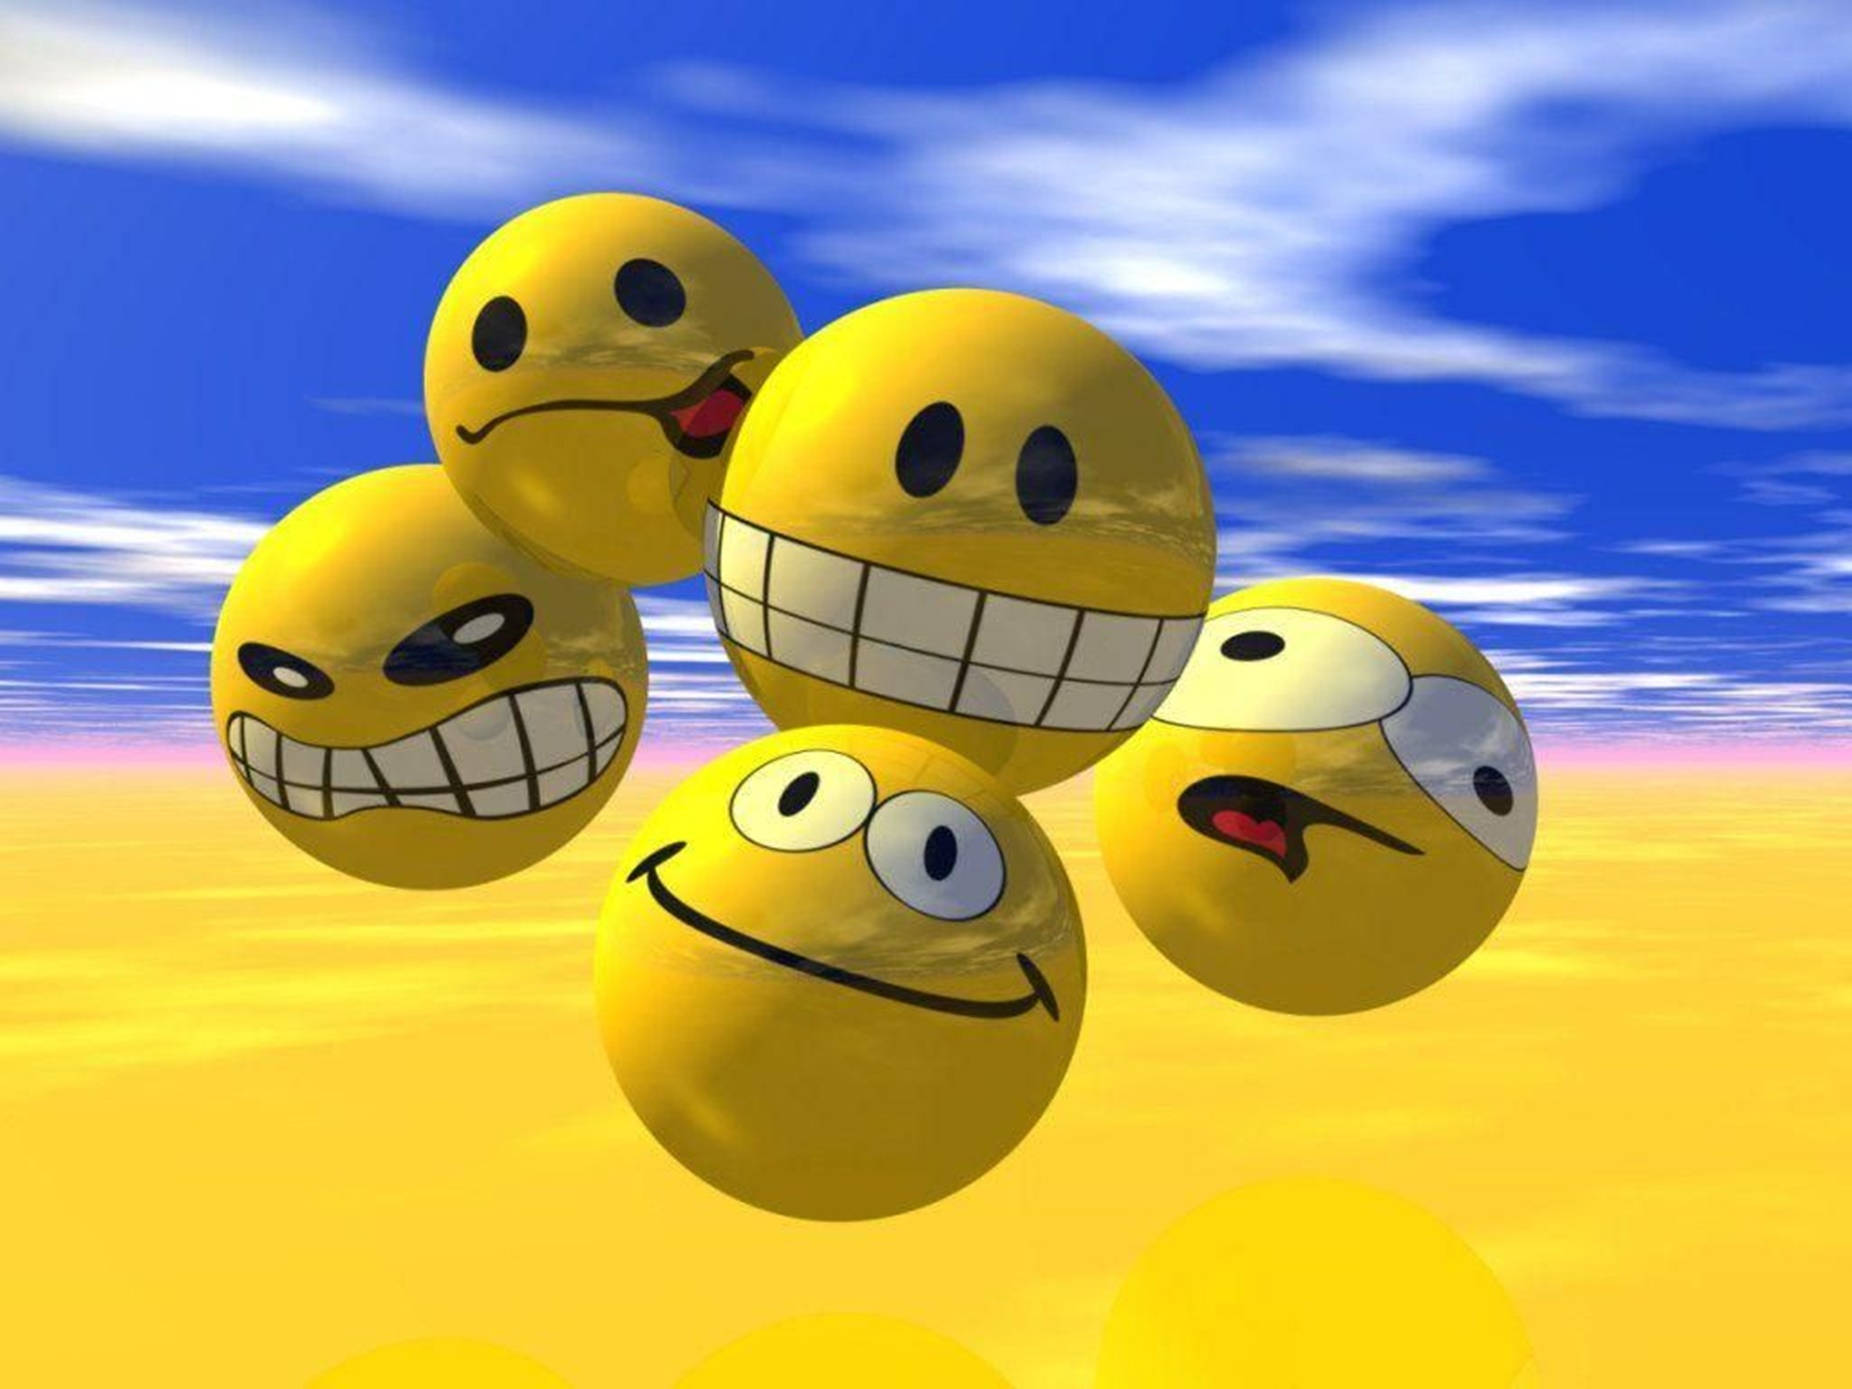 Funny Yellow Emoticons 3d Animation Background